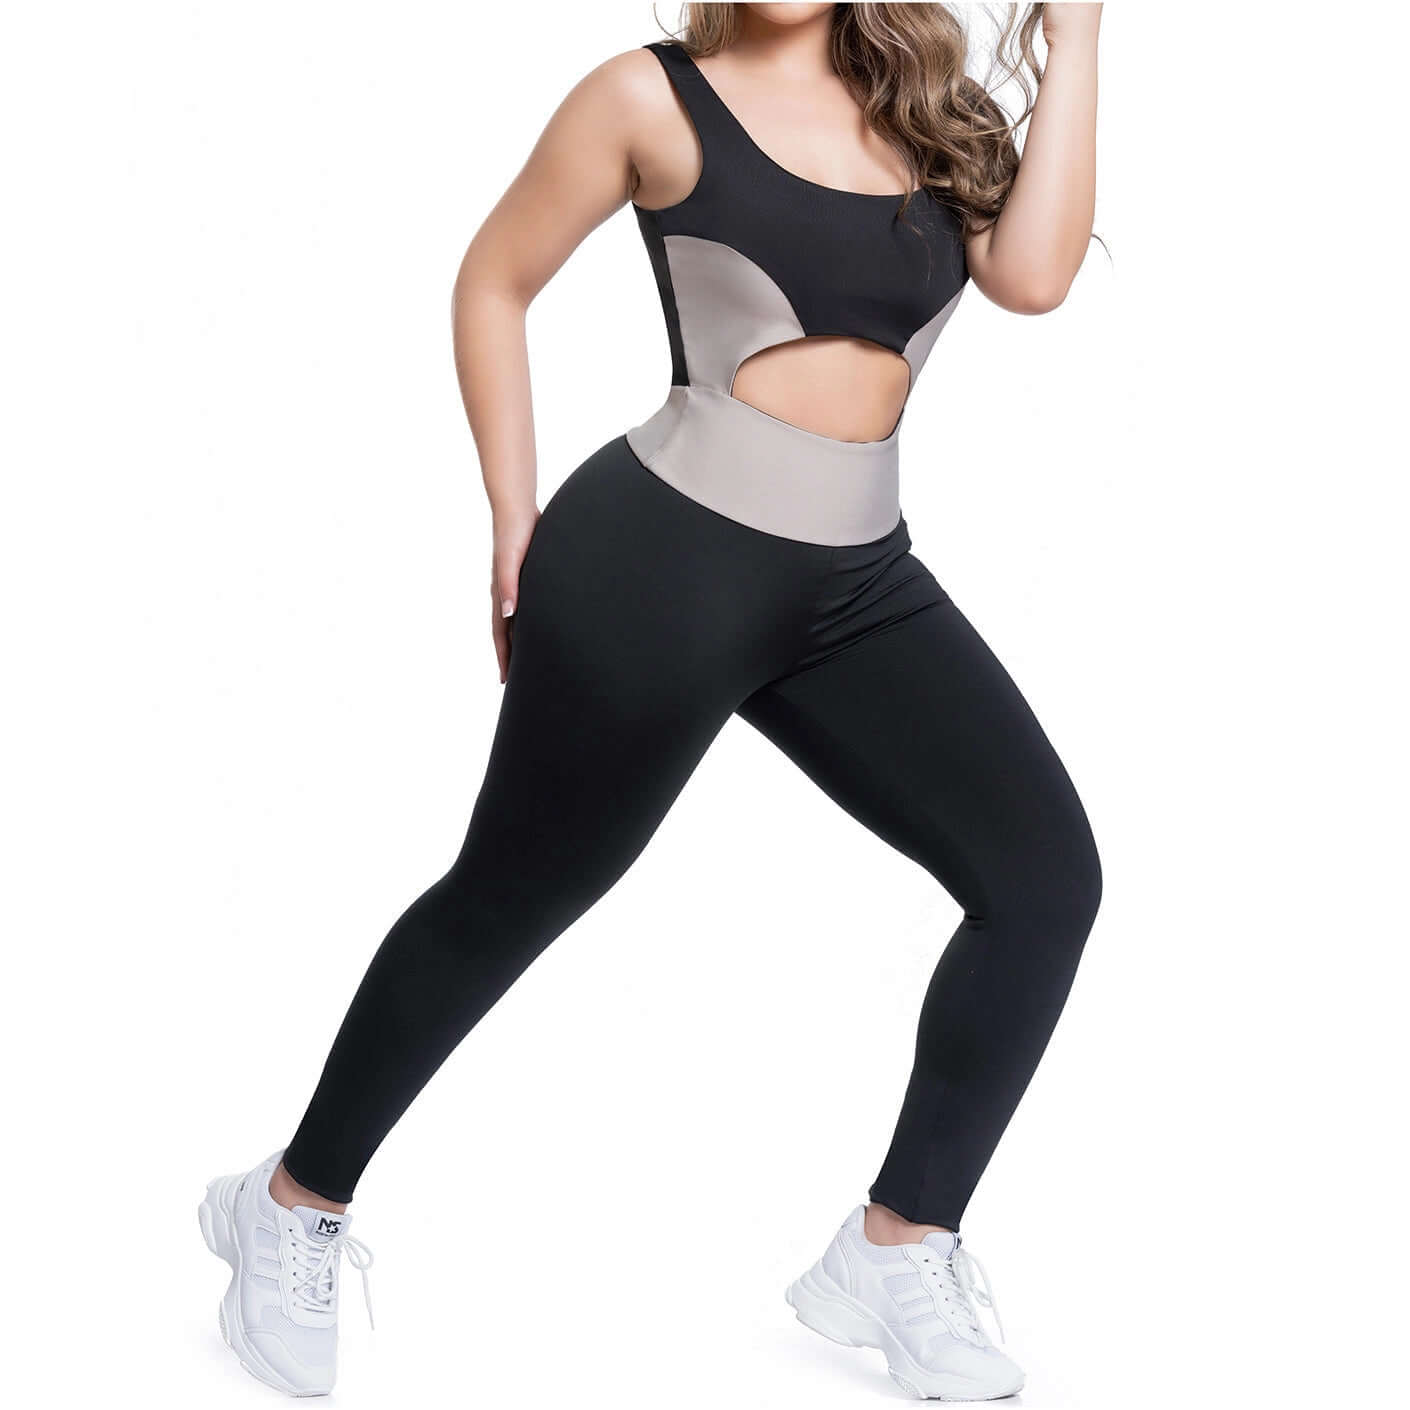 HIGH WAISTED SPORT ONE PIECE WITH ACTIVEWEAR BRA FOR WOMEN | SHAPE LINE